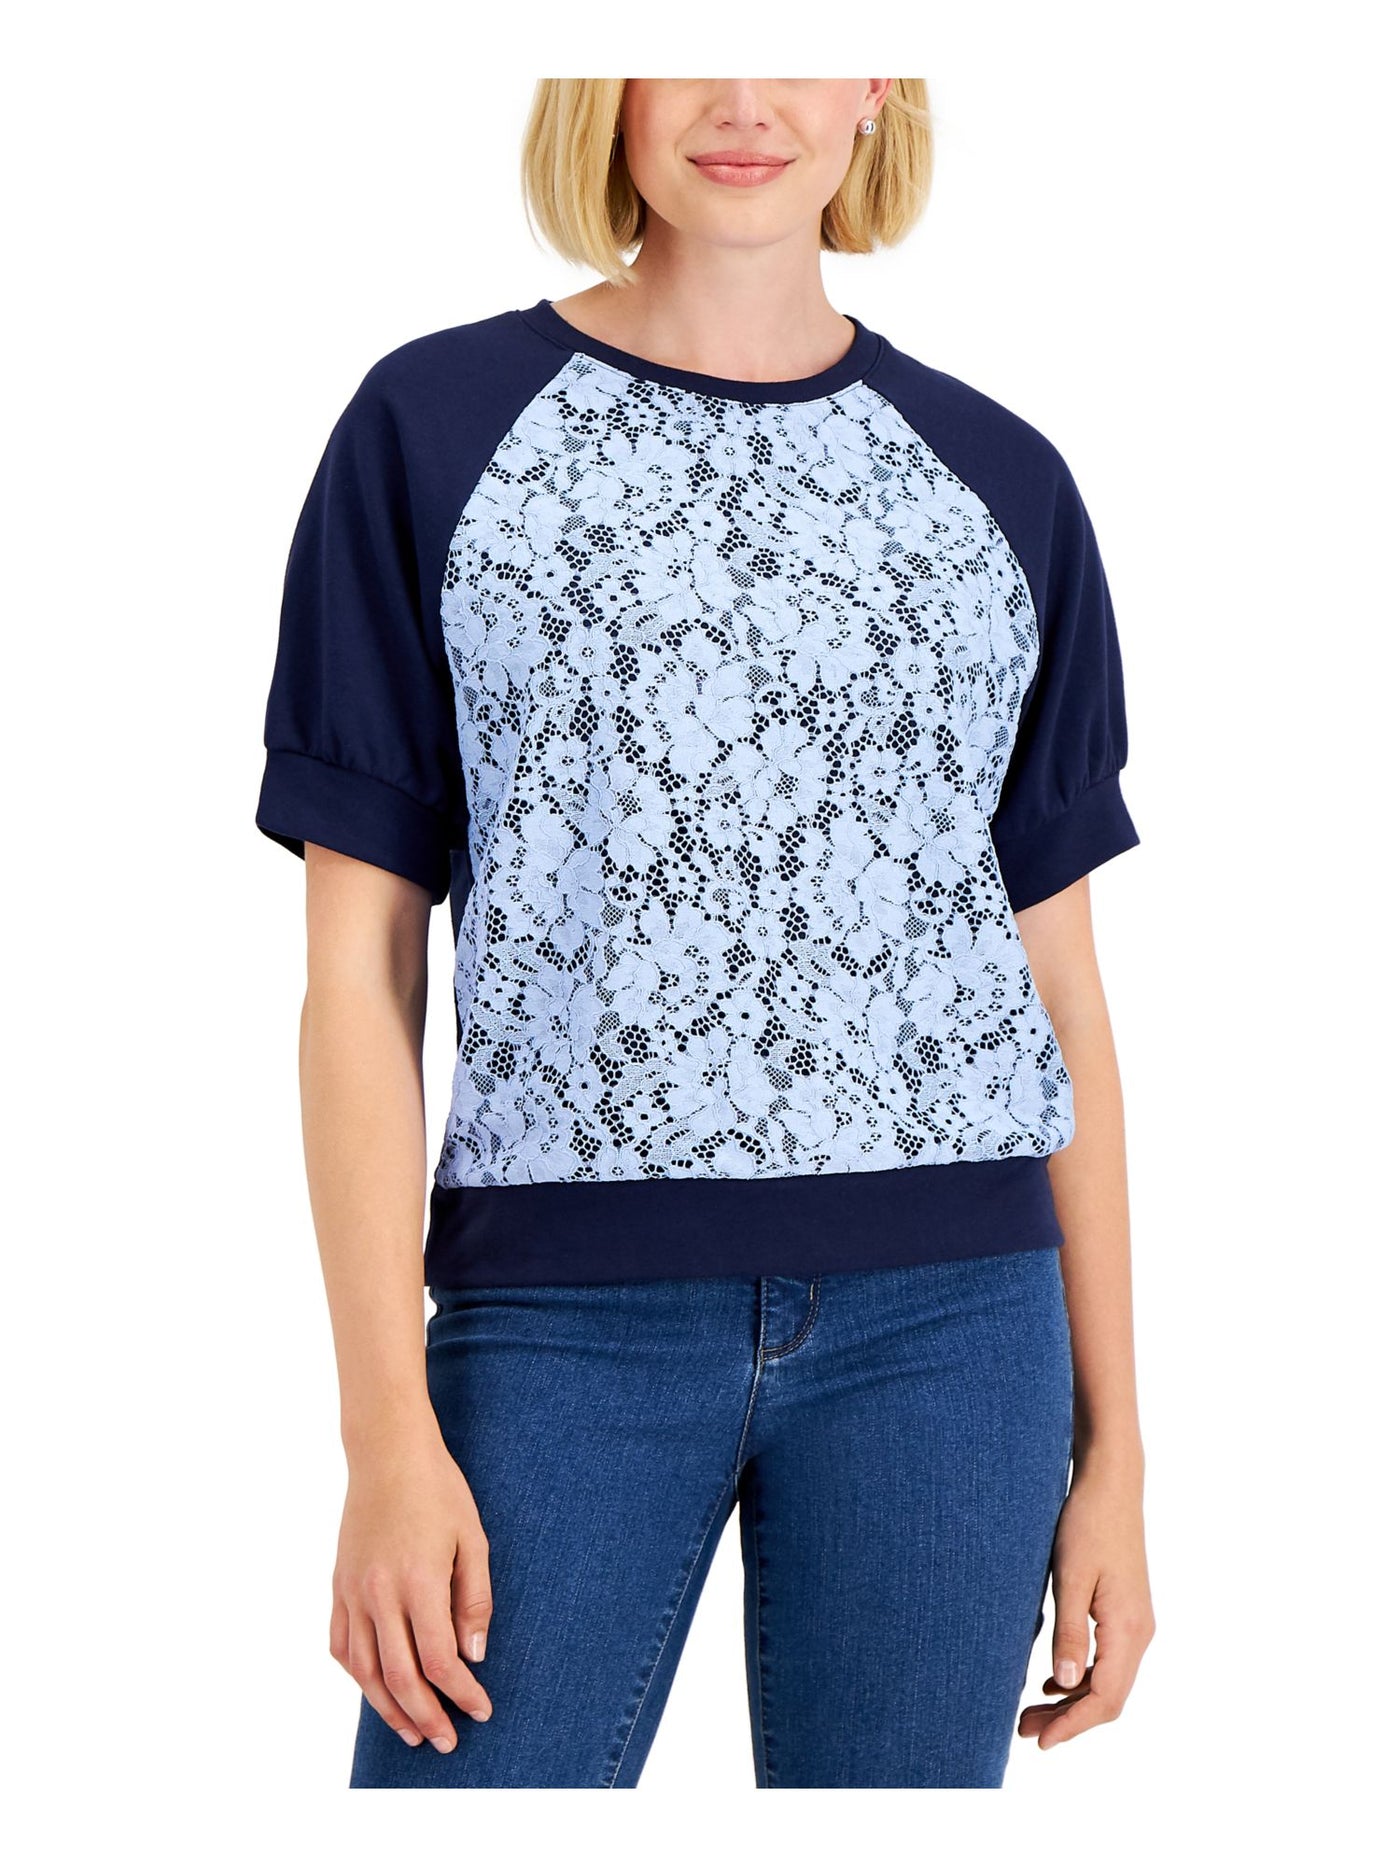 CHARTER CLUB Womens Navy Lace Baseball Style Short Sleeve Crew Neck Top L